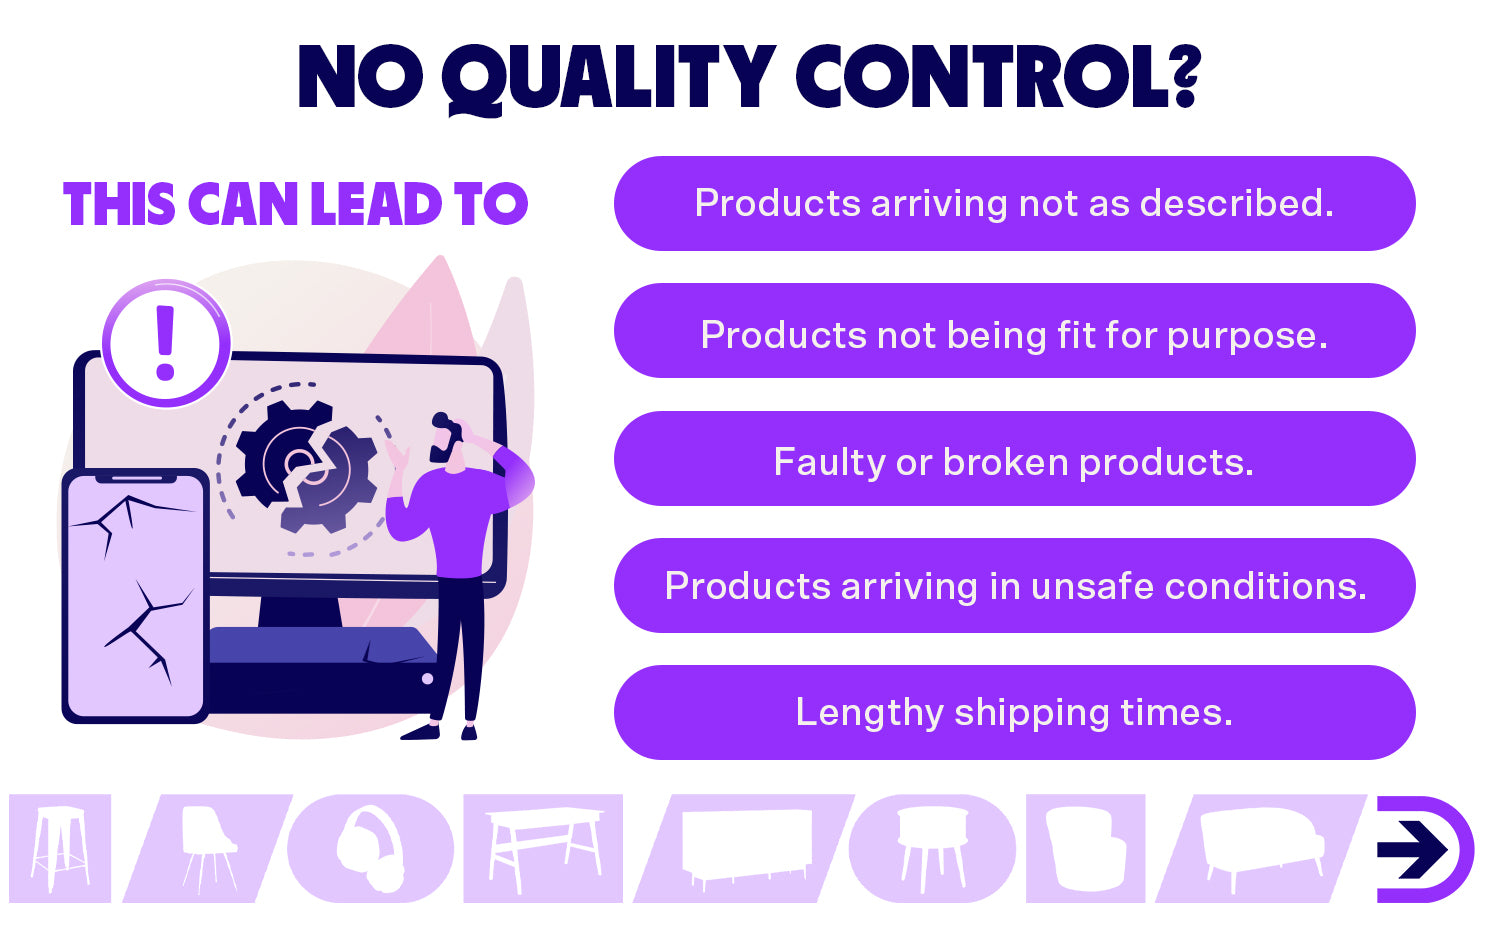 Quality control is an important process in the retail supply chain and can be skipped when dealing with sketchy suppliers.